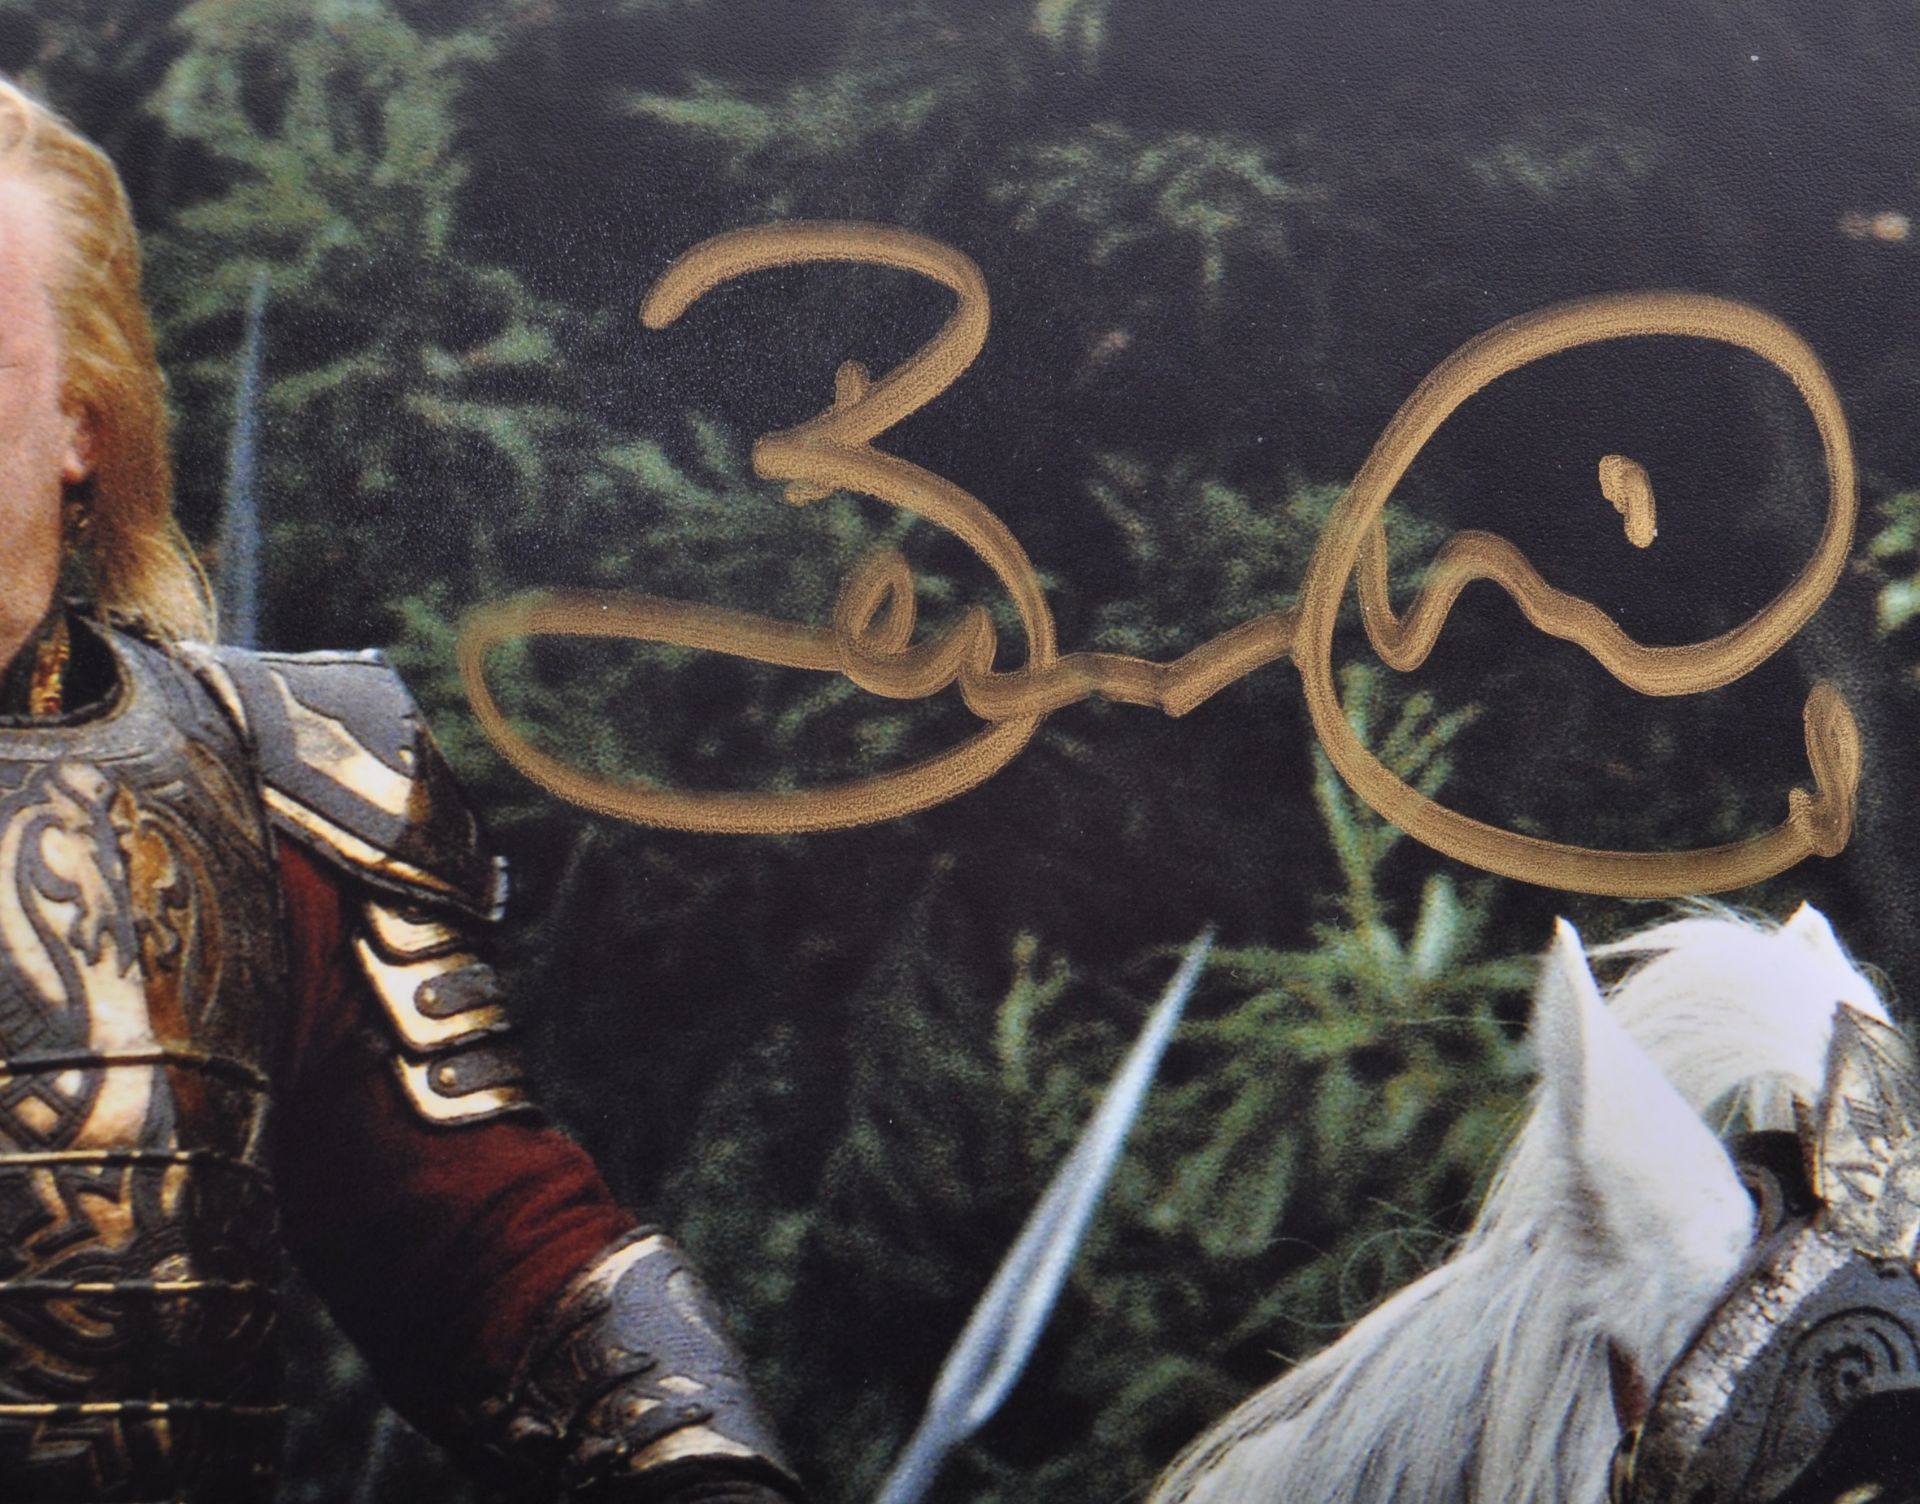 THE LORD OF THE RINGS - BERNARD HILL - AUTOGRAPHED 8X10" PHOTO - Image 2 of 2